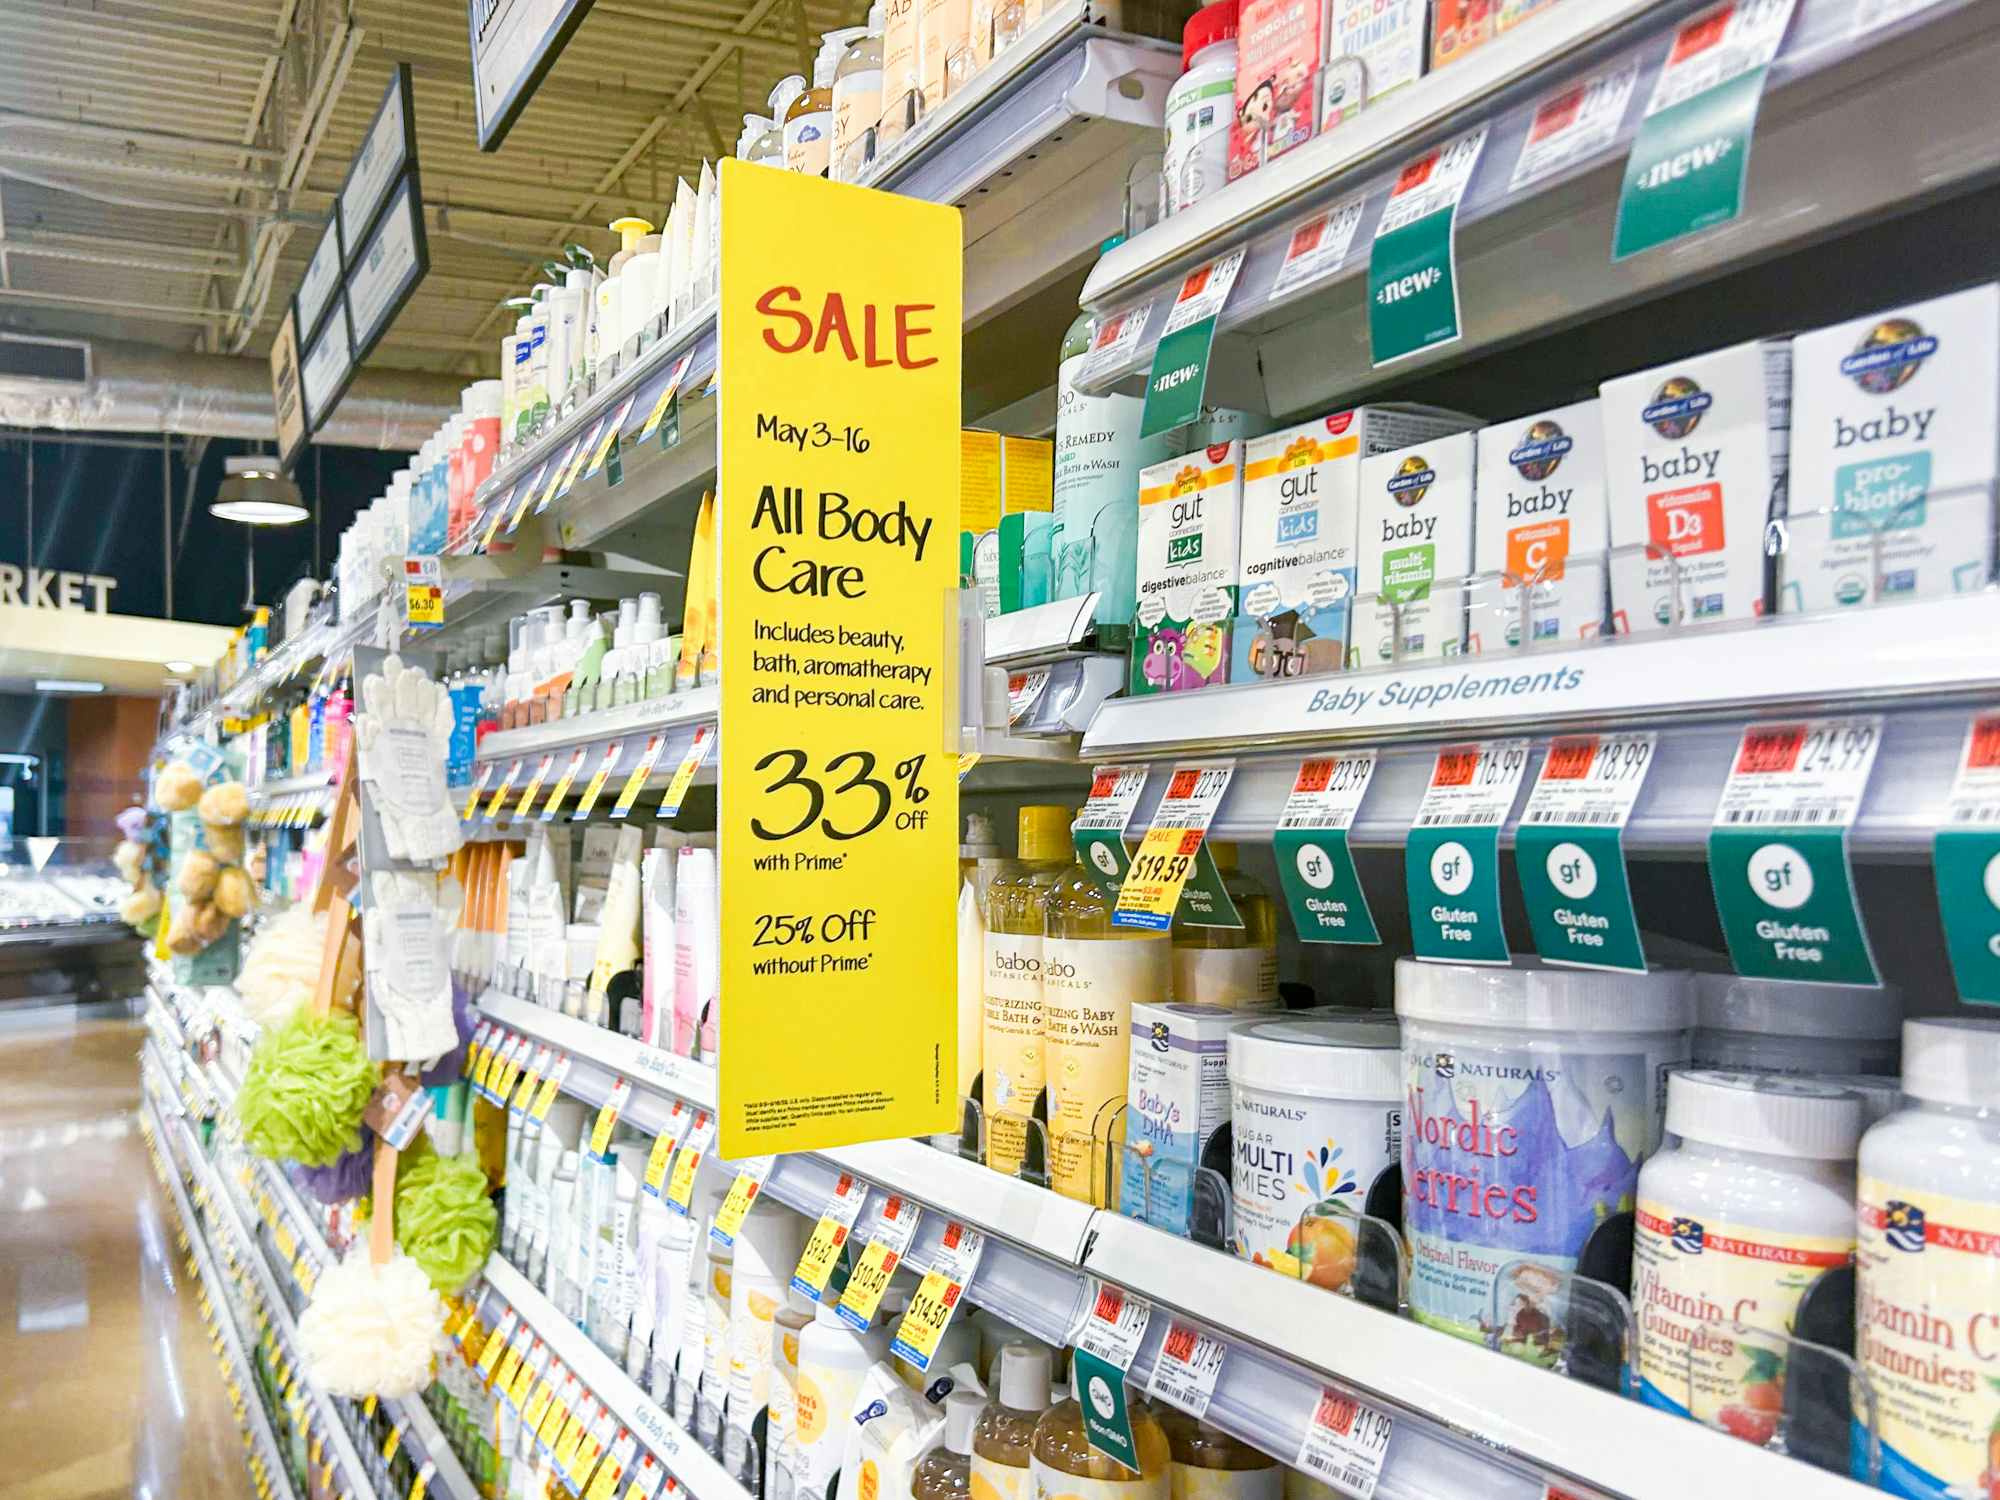 A shelf of body care items in Whole Foods with large SALE signs 33% off for Prime Members and 25% off for non members